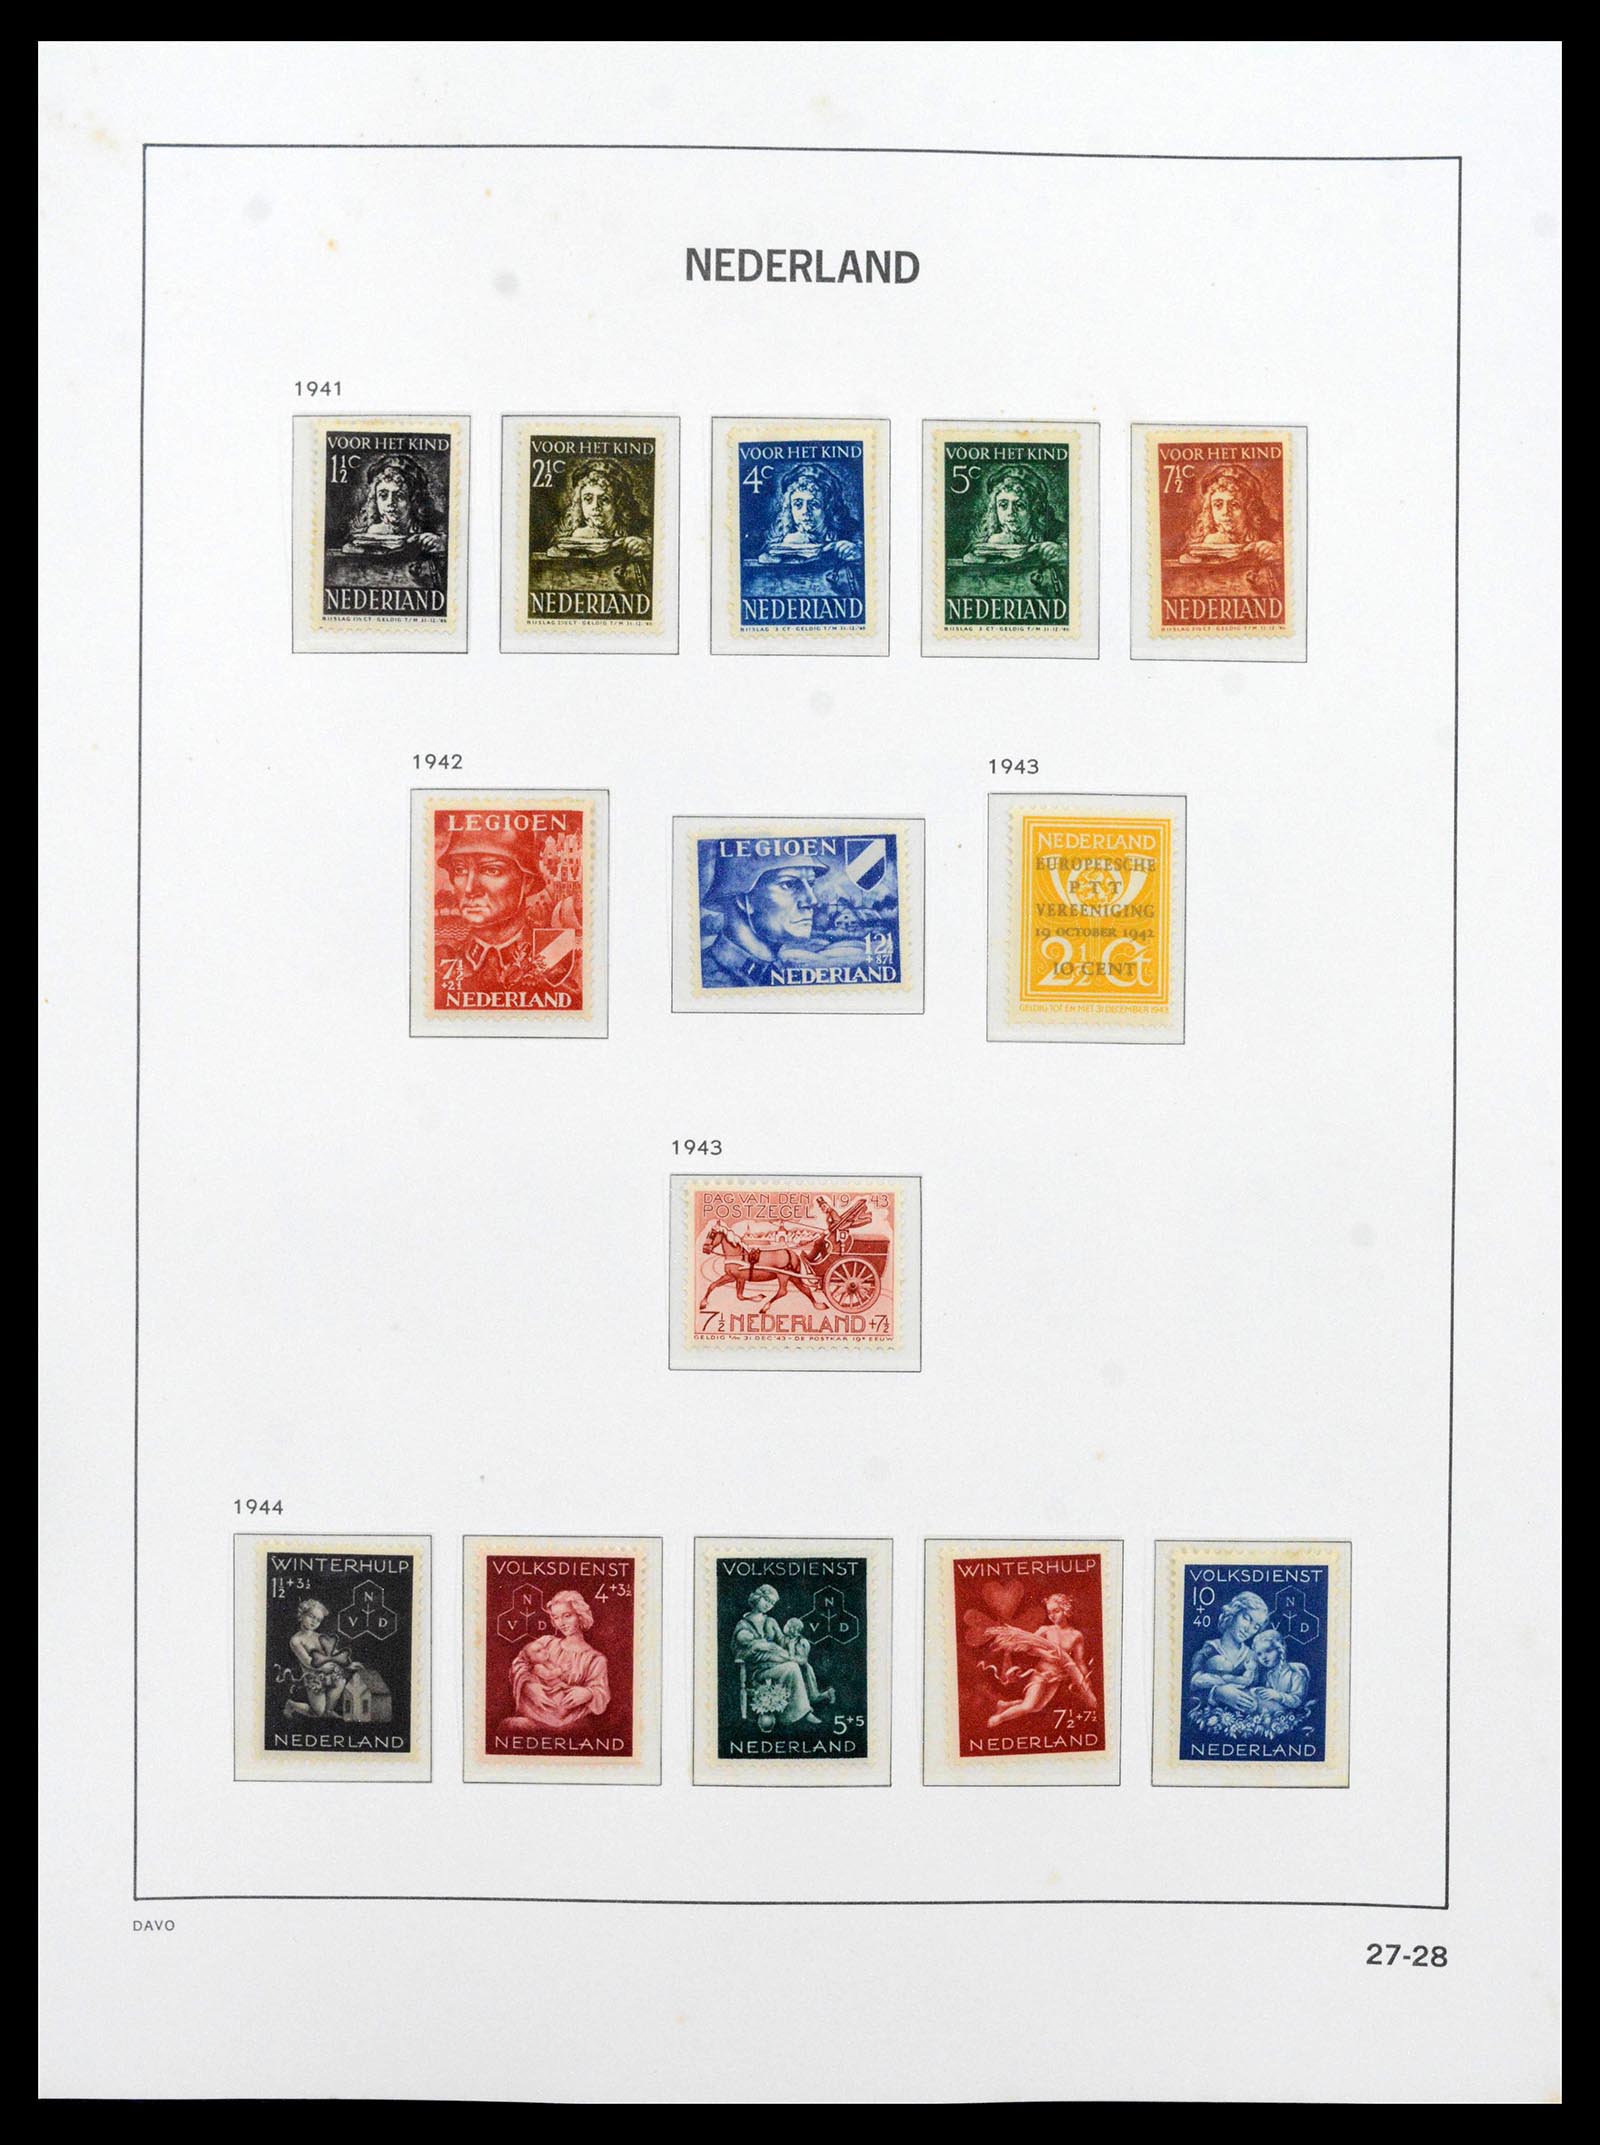 39035 0027 - Stamp collection 39035 Netherlands 1852-1968.